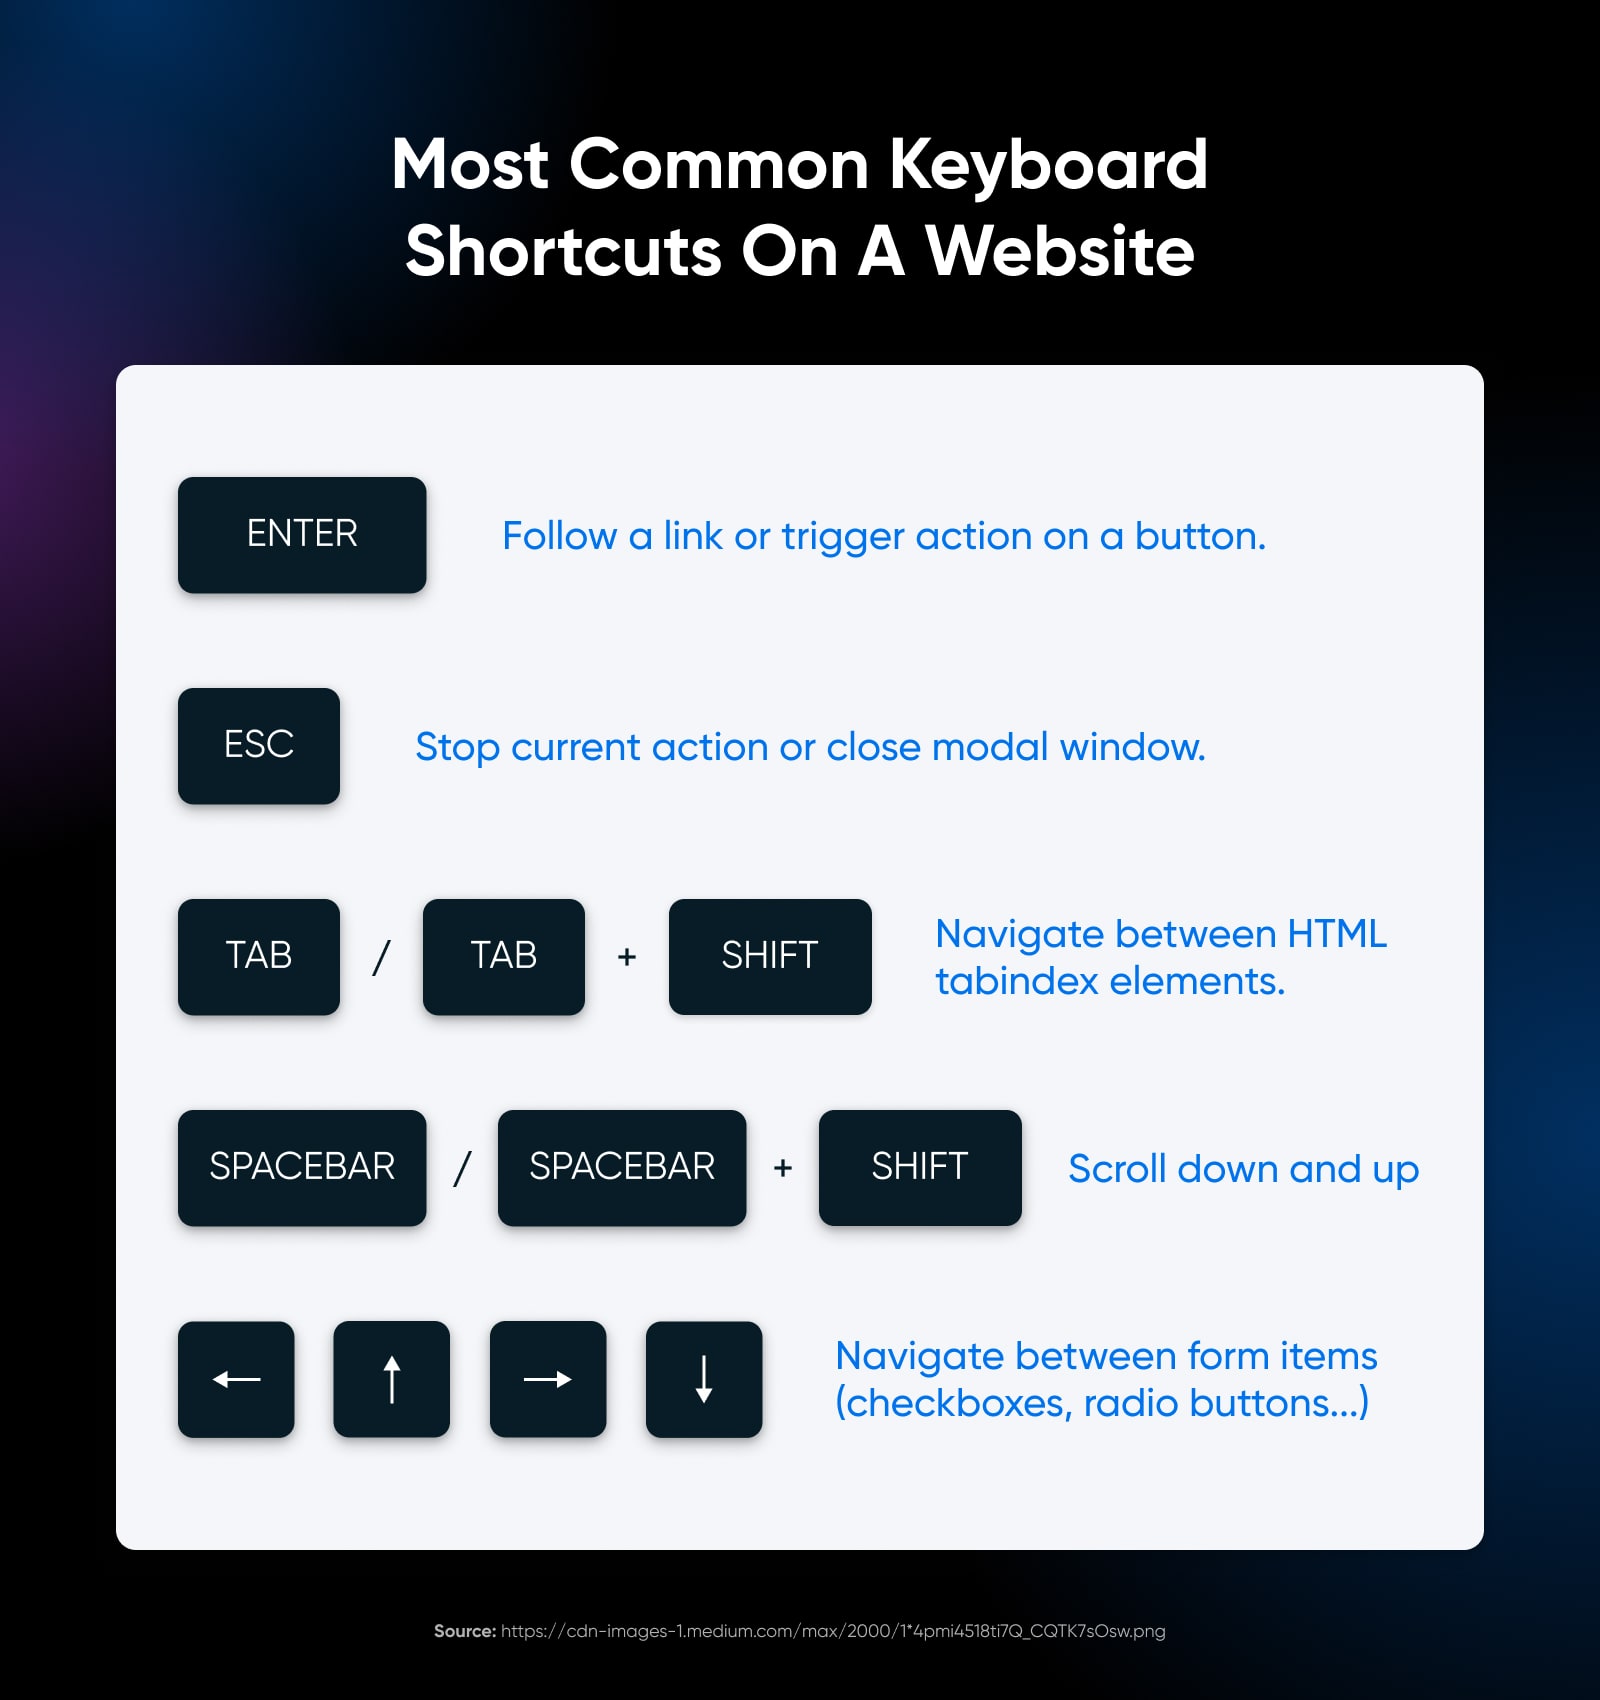 A cheat sheet of most common keyboard shortcuts like enter for following a link, esc to stop an action, and arrow keys to navigate between items in a form